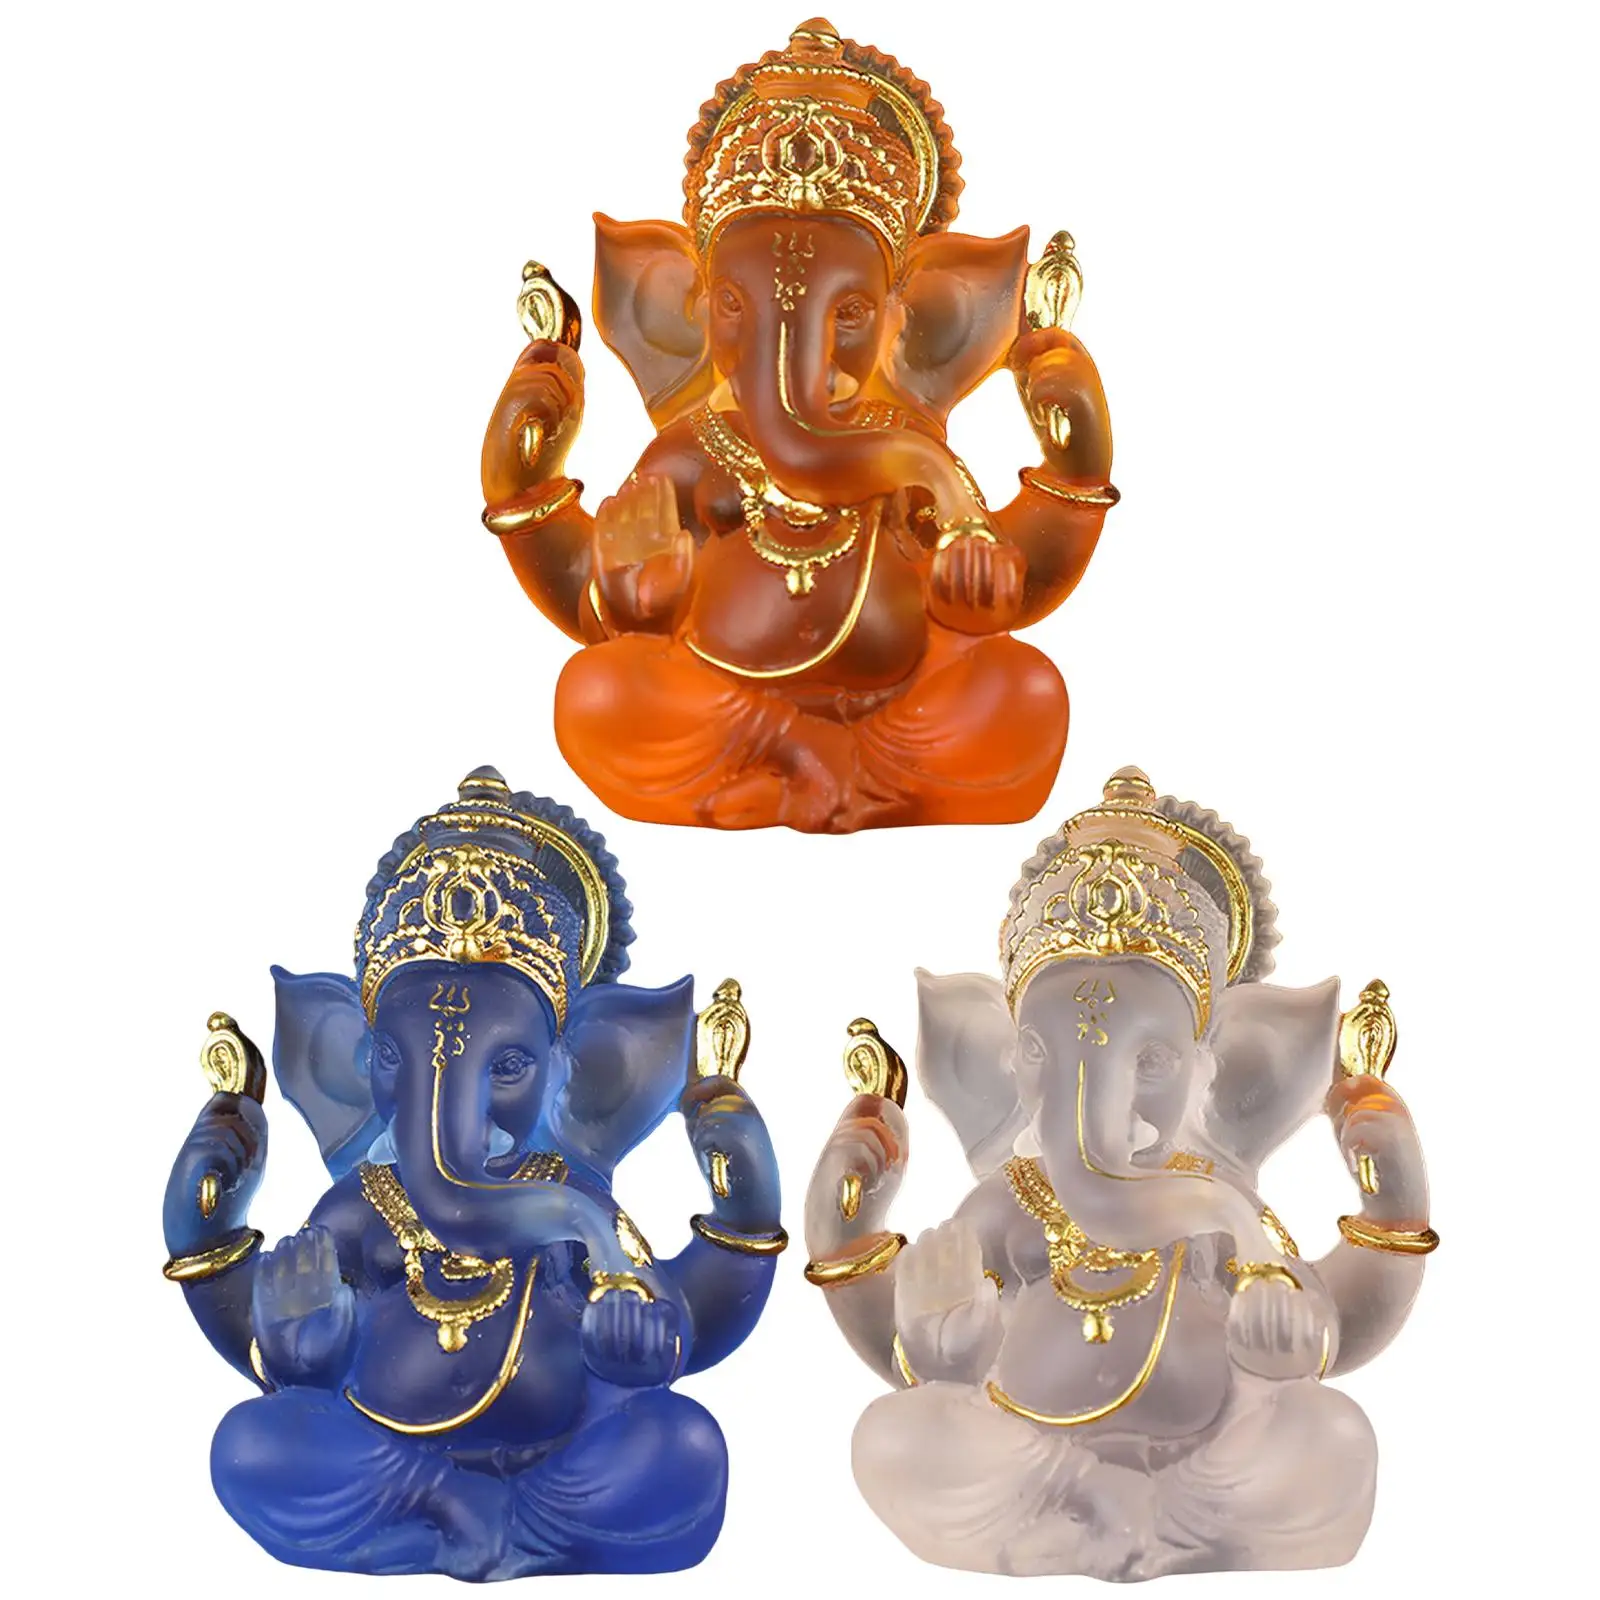 

Ganesh Statue Lucky Elephant The Hindu God Home Decorations Figures Lord Wealth Clear Ganesha Figurine for Car Decoration